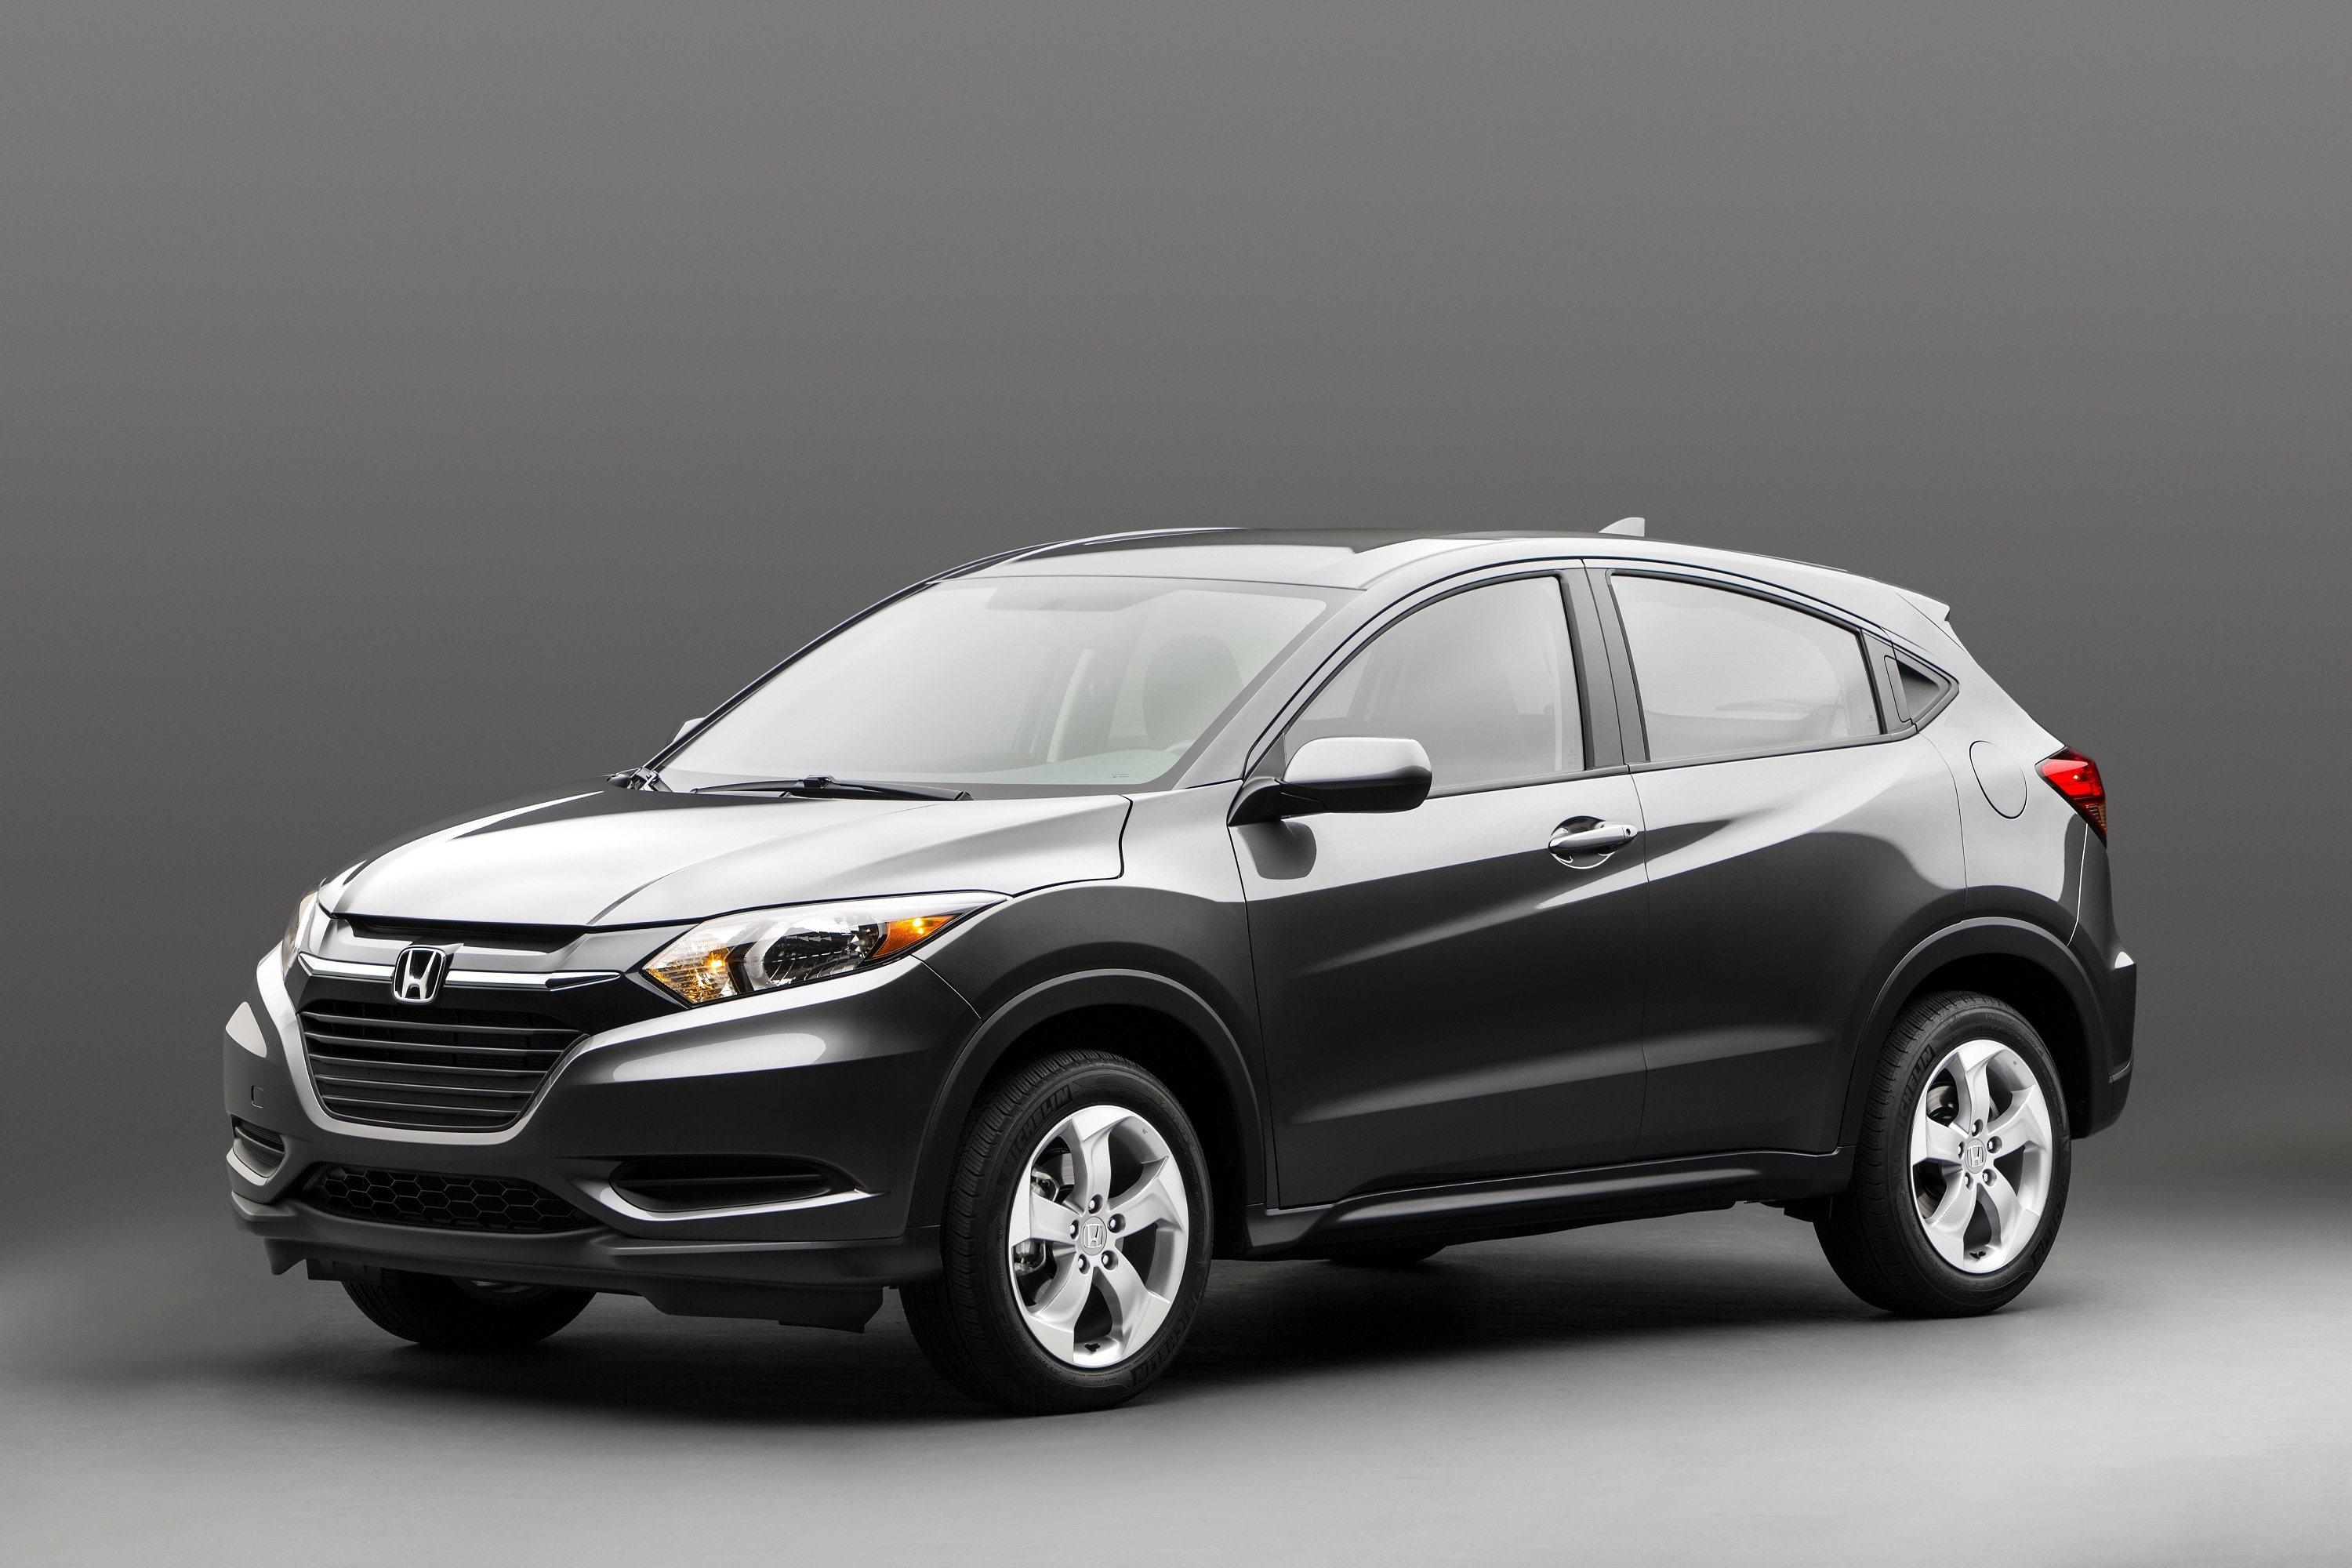 Honda HR-V, Fit for Gen Y, Subcompact crossover, Youthful appeal, 3000x2000 HD Desktop